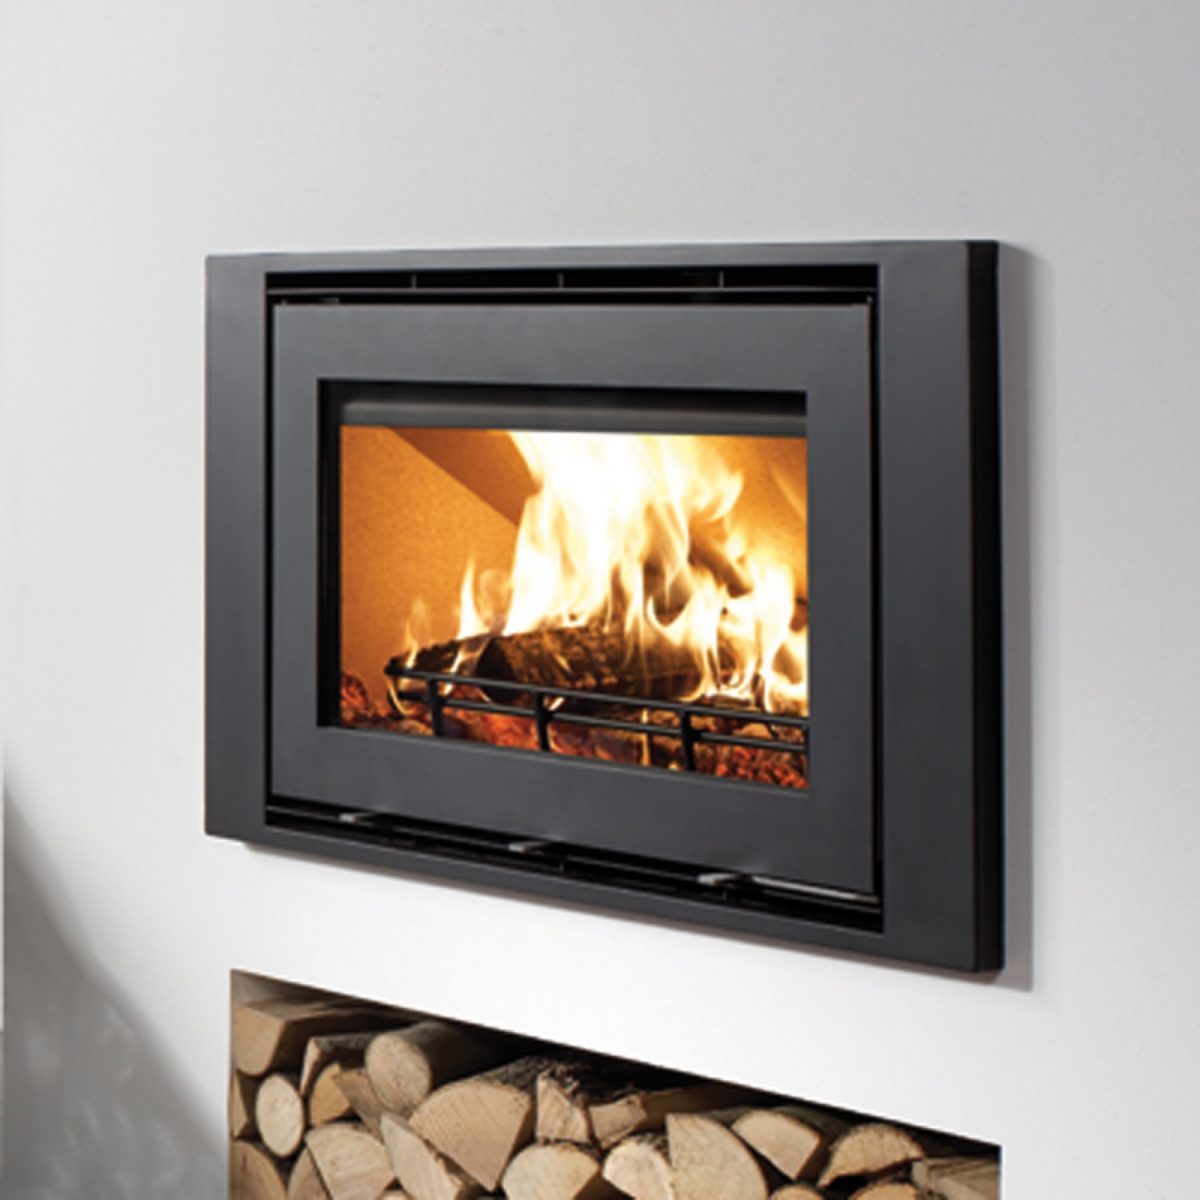 Westfire Uniq 32 SE Inset Wood Burning Stove with Wide Frame